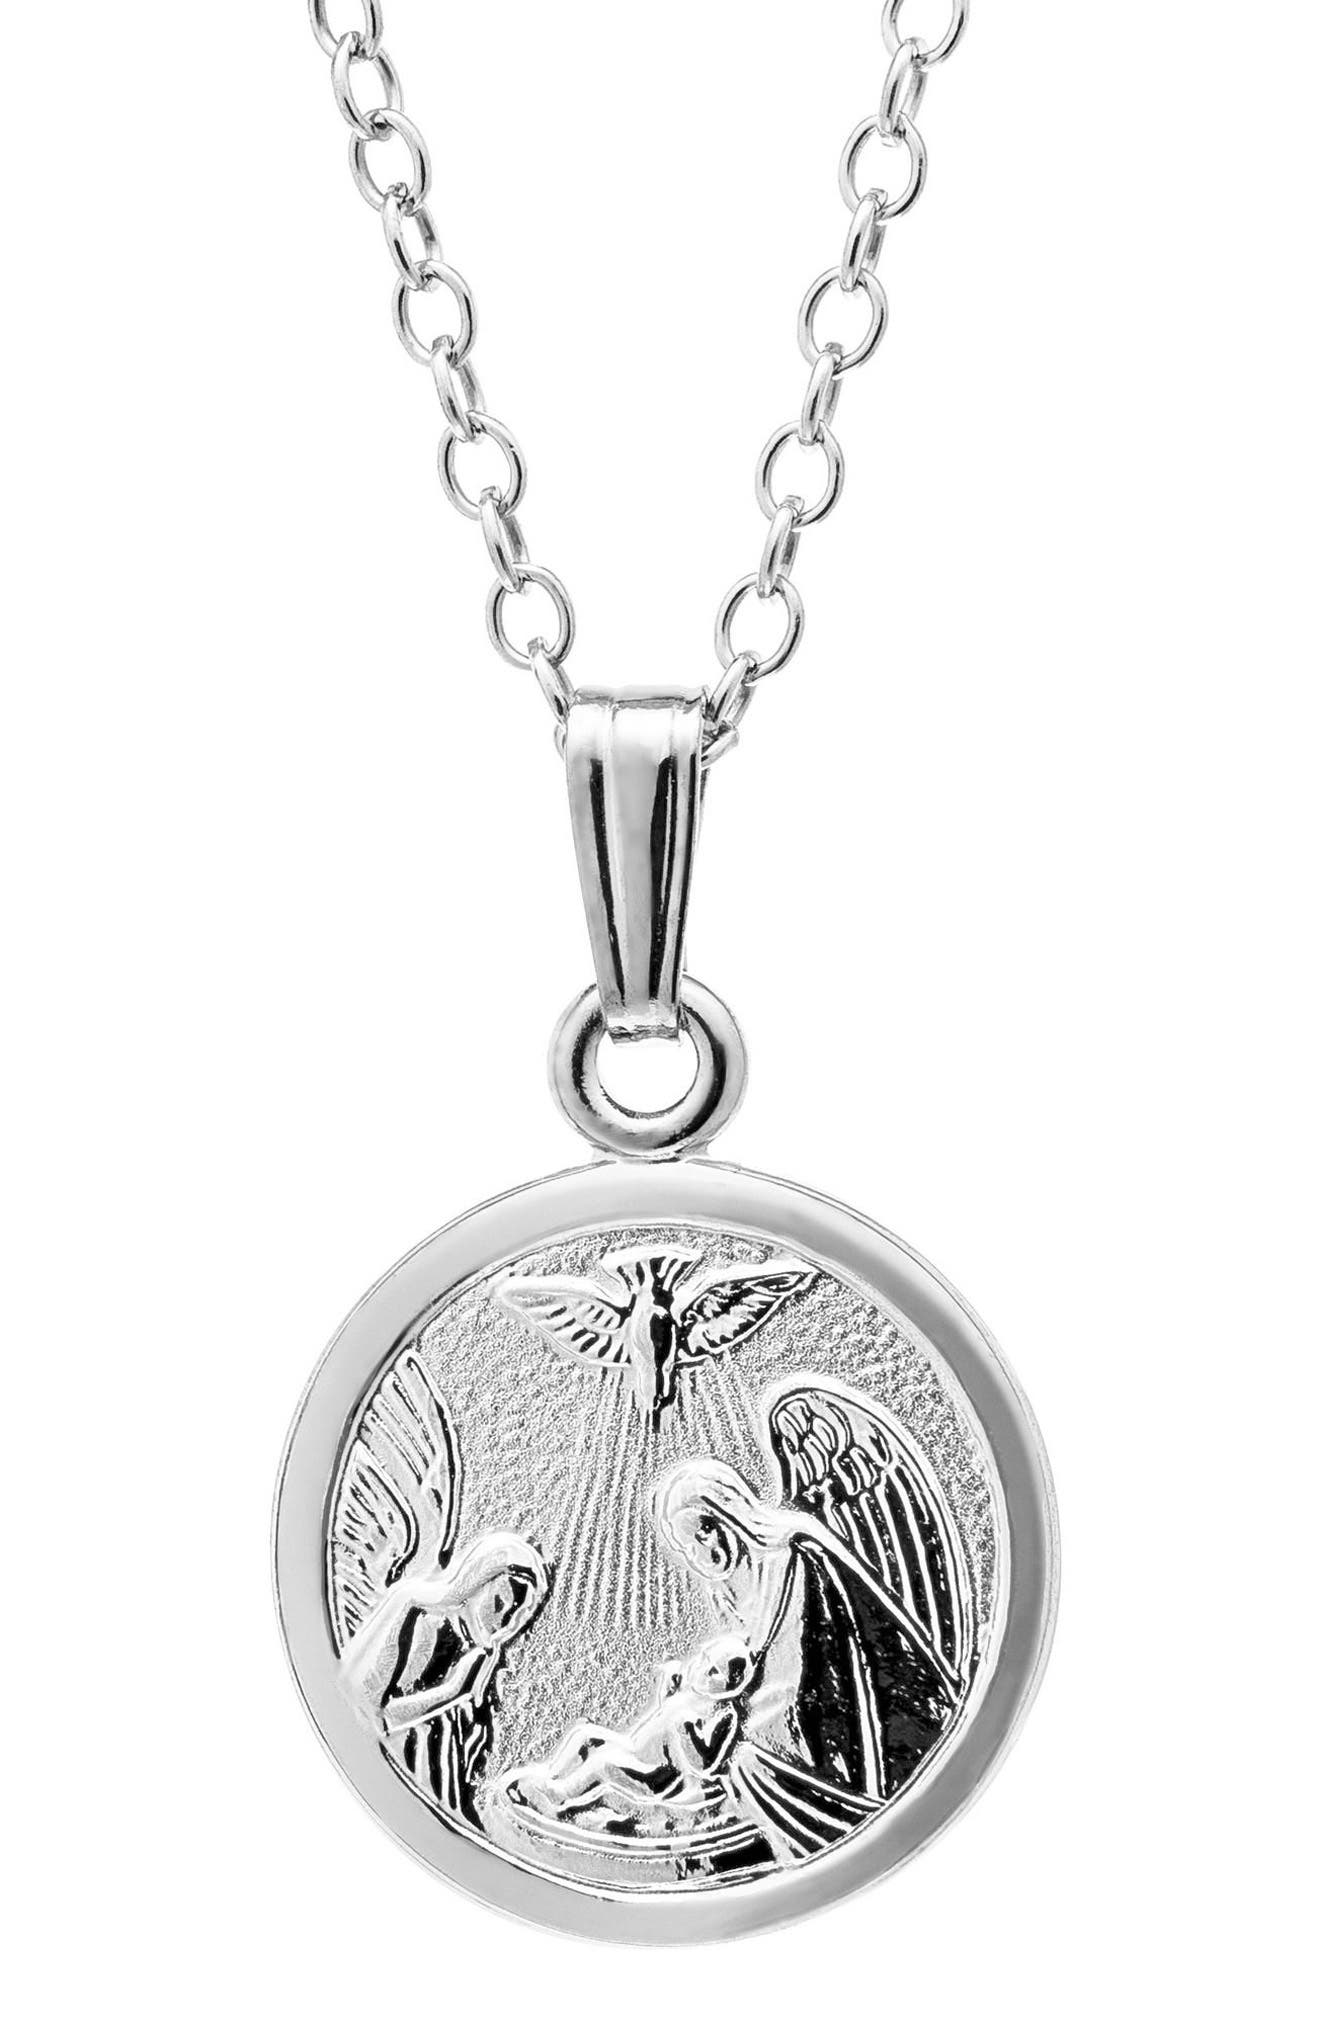 Details about   Diamond & Ruby Lucky Guardian Angel Cherub Pendant Necklace Set In Set in Yello 